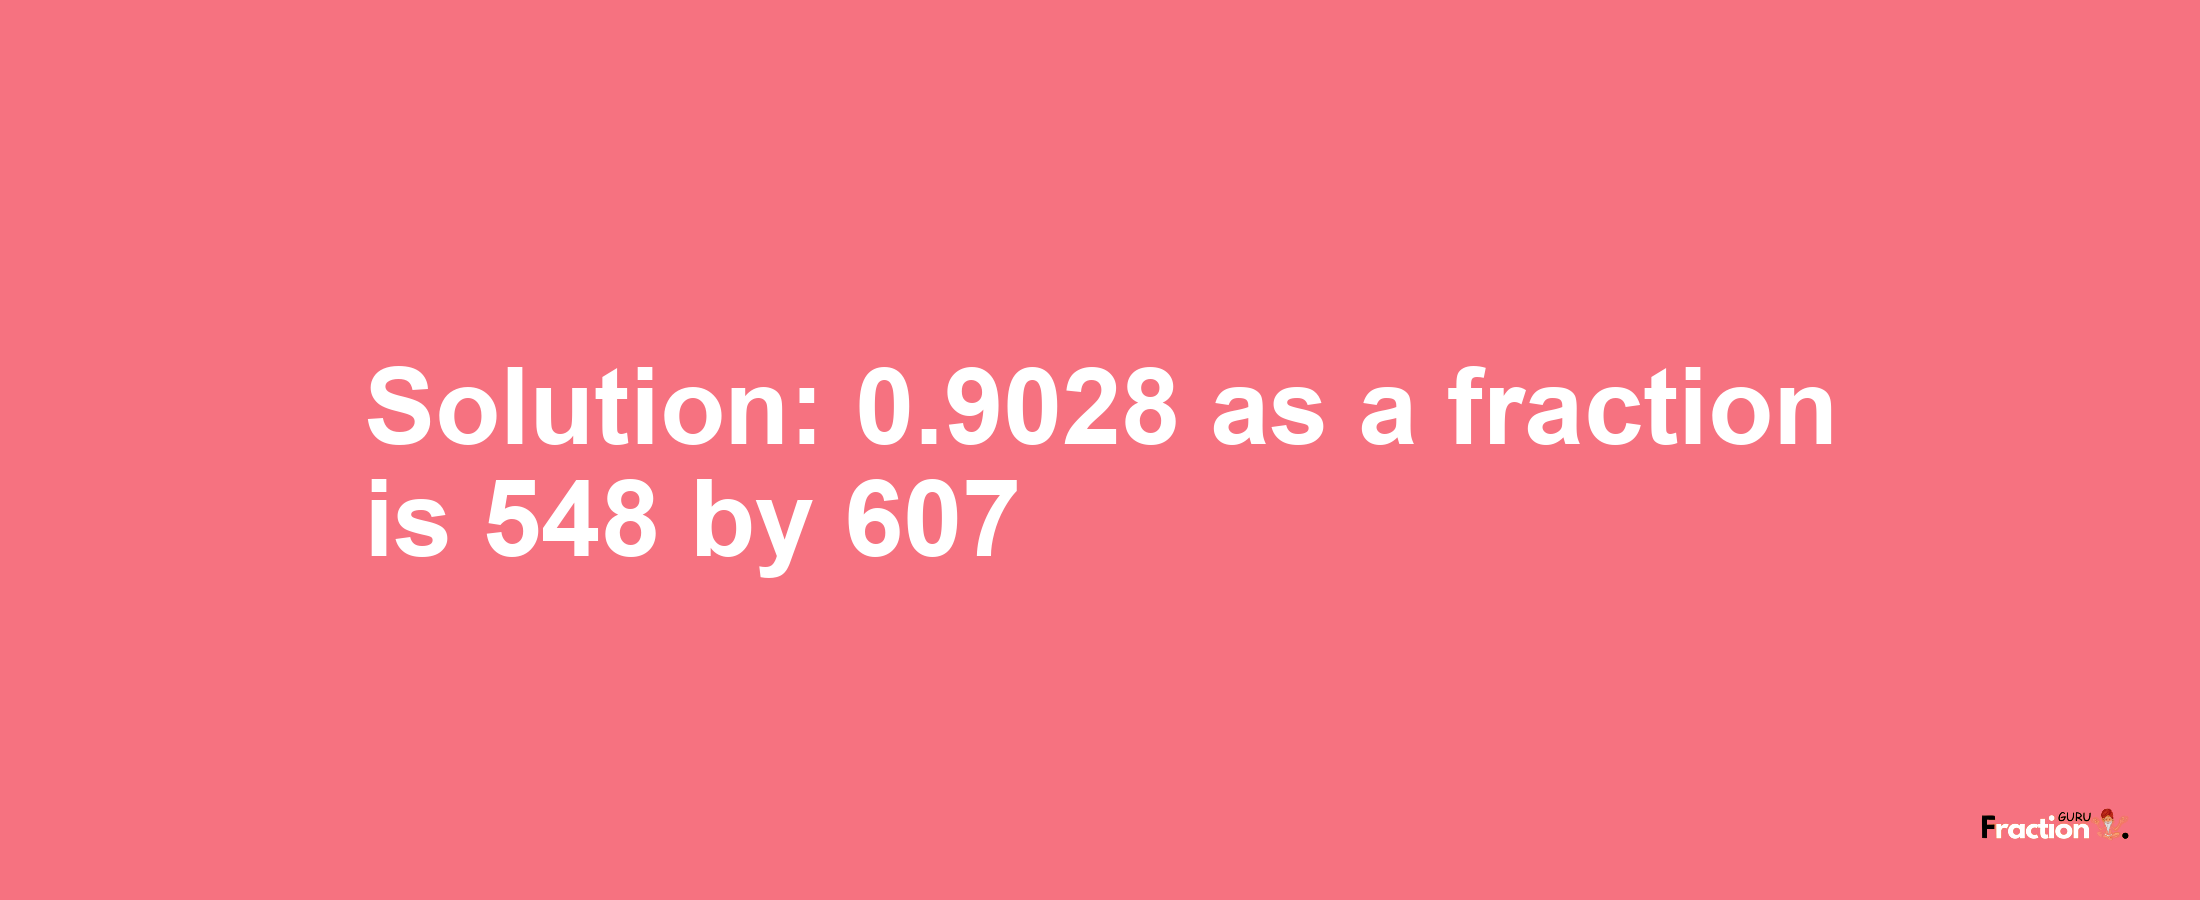 Solution:0.9028 as a fraction is 548/607